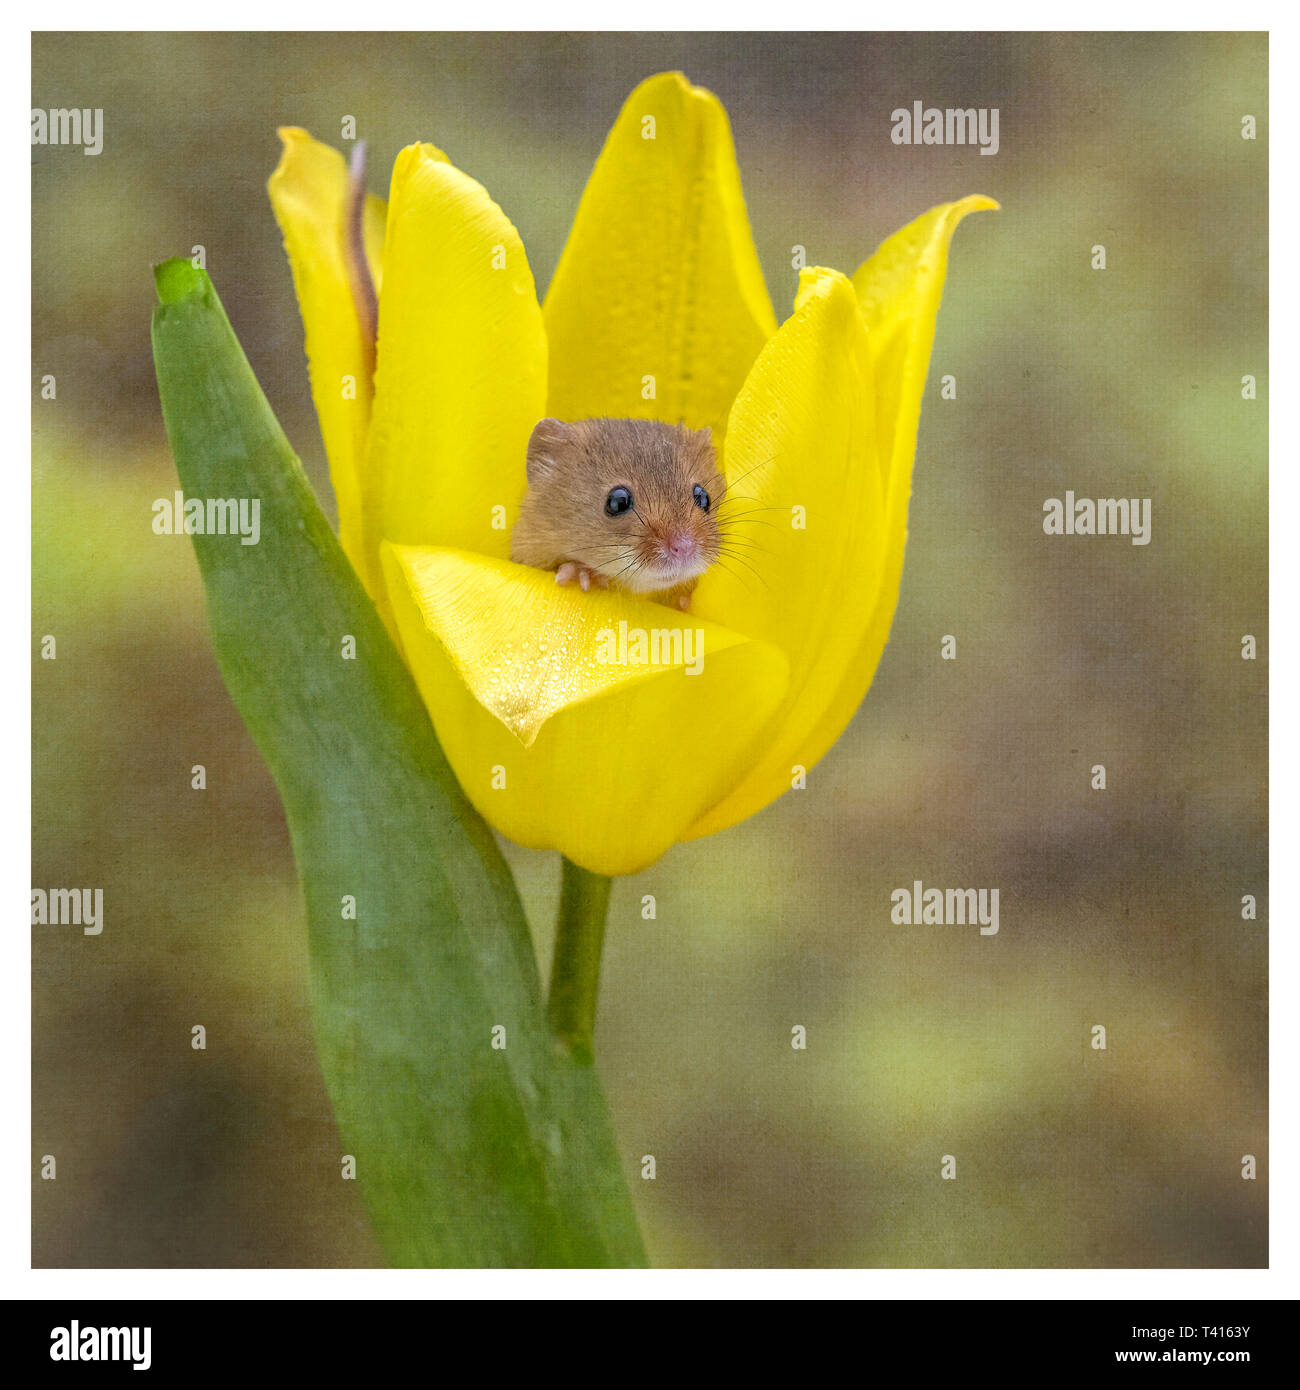 Fine Art Harvest Mice (Micromys Minutus) inside Tulips with textured finish applied Stock Photo